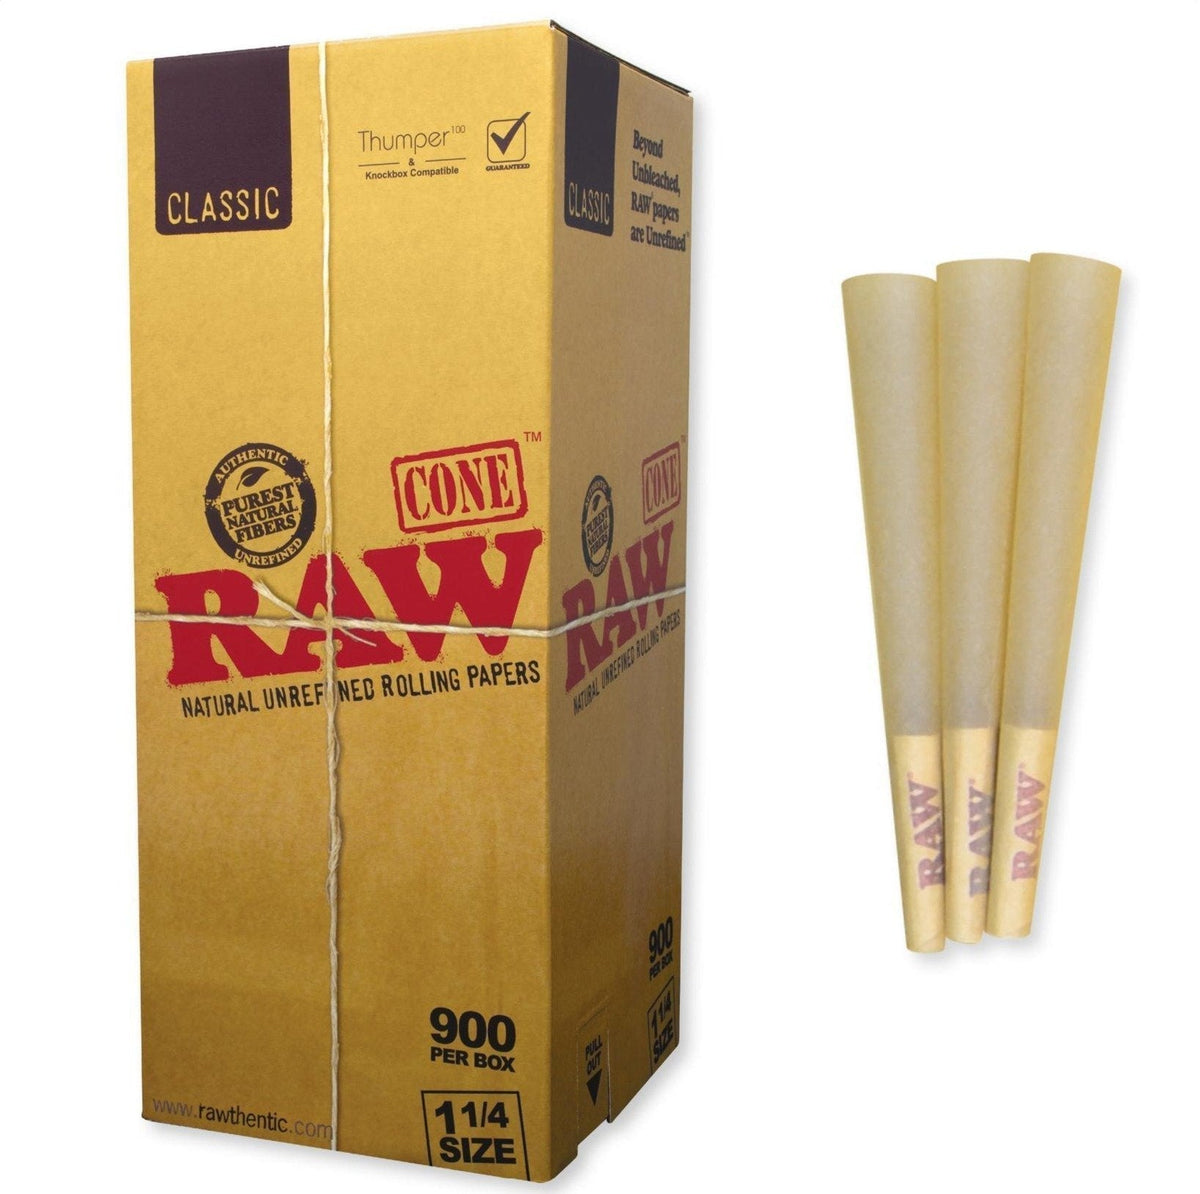 Raw Garden 3 Pack Pre Roll Tubes Packaging